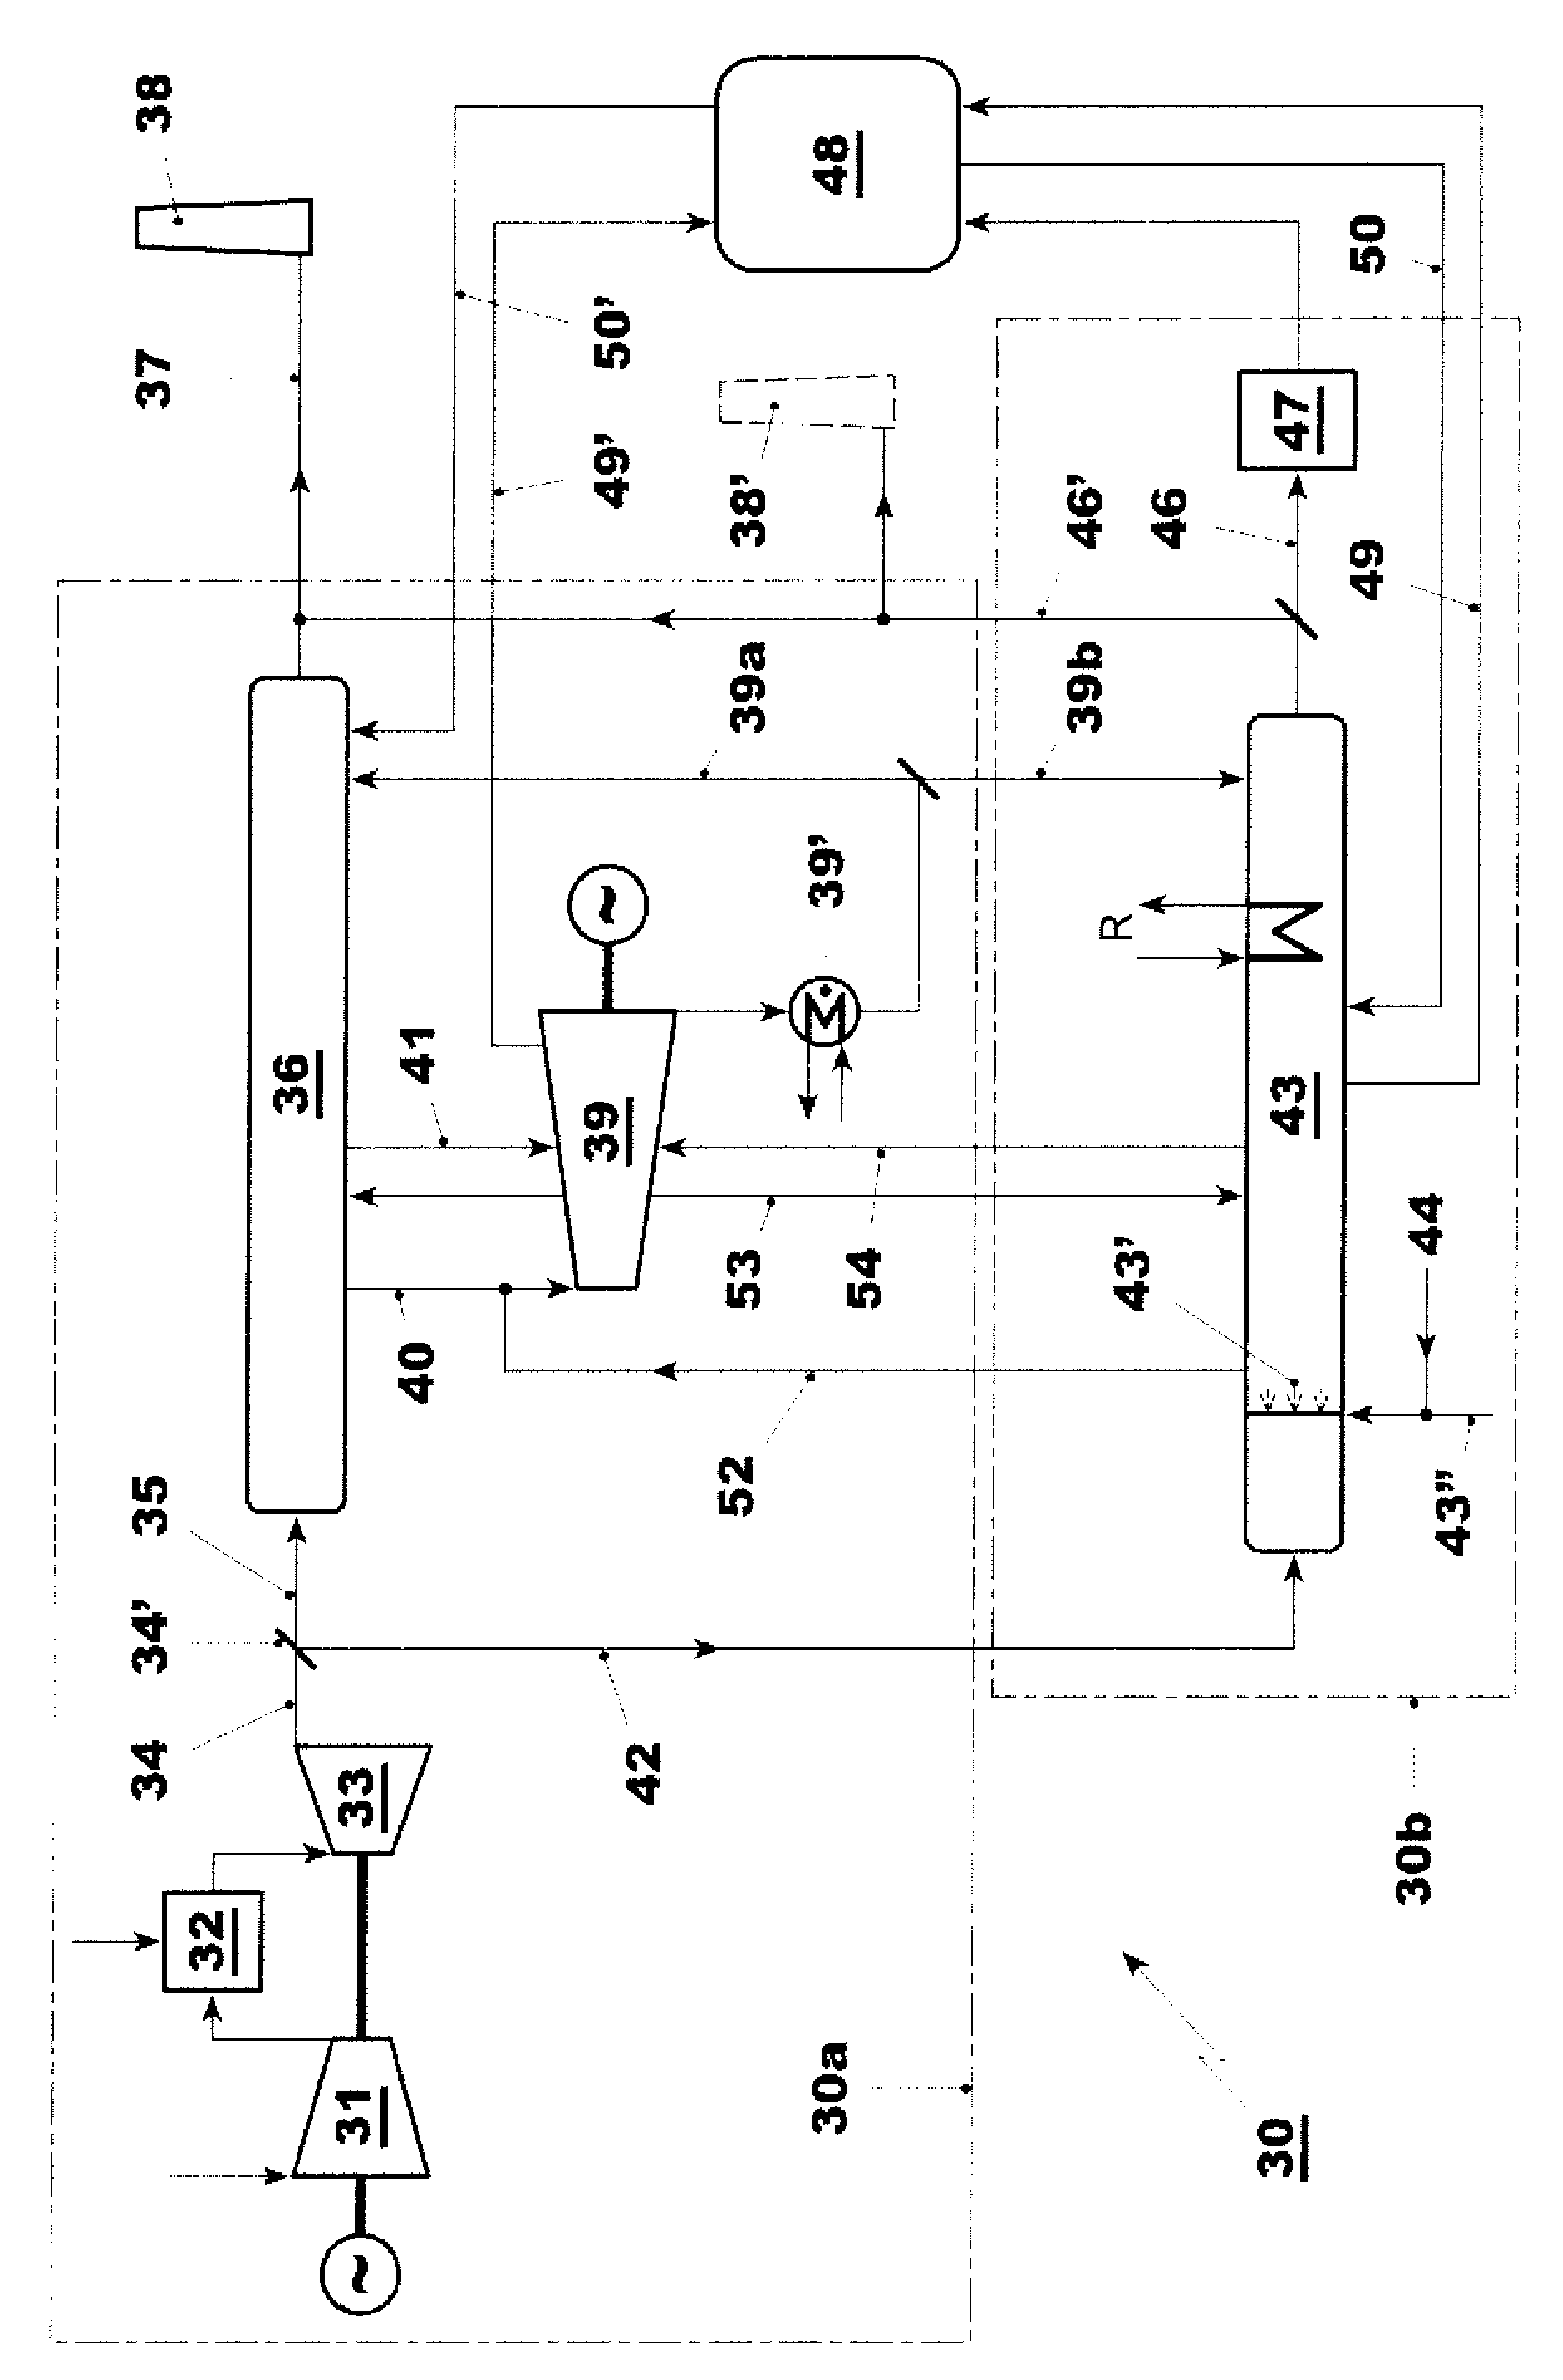 Combined cycle power plant with CO2 capture and method to operate it